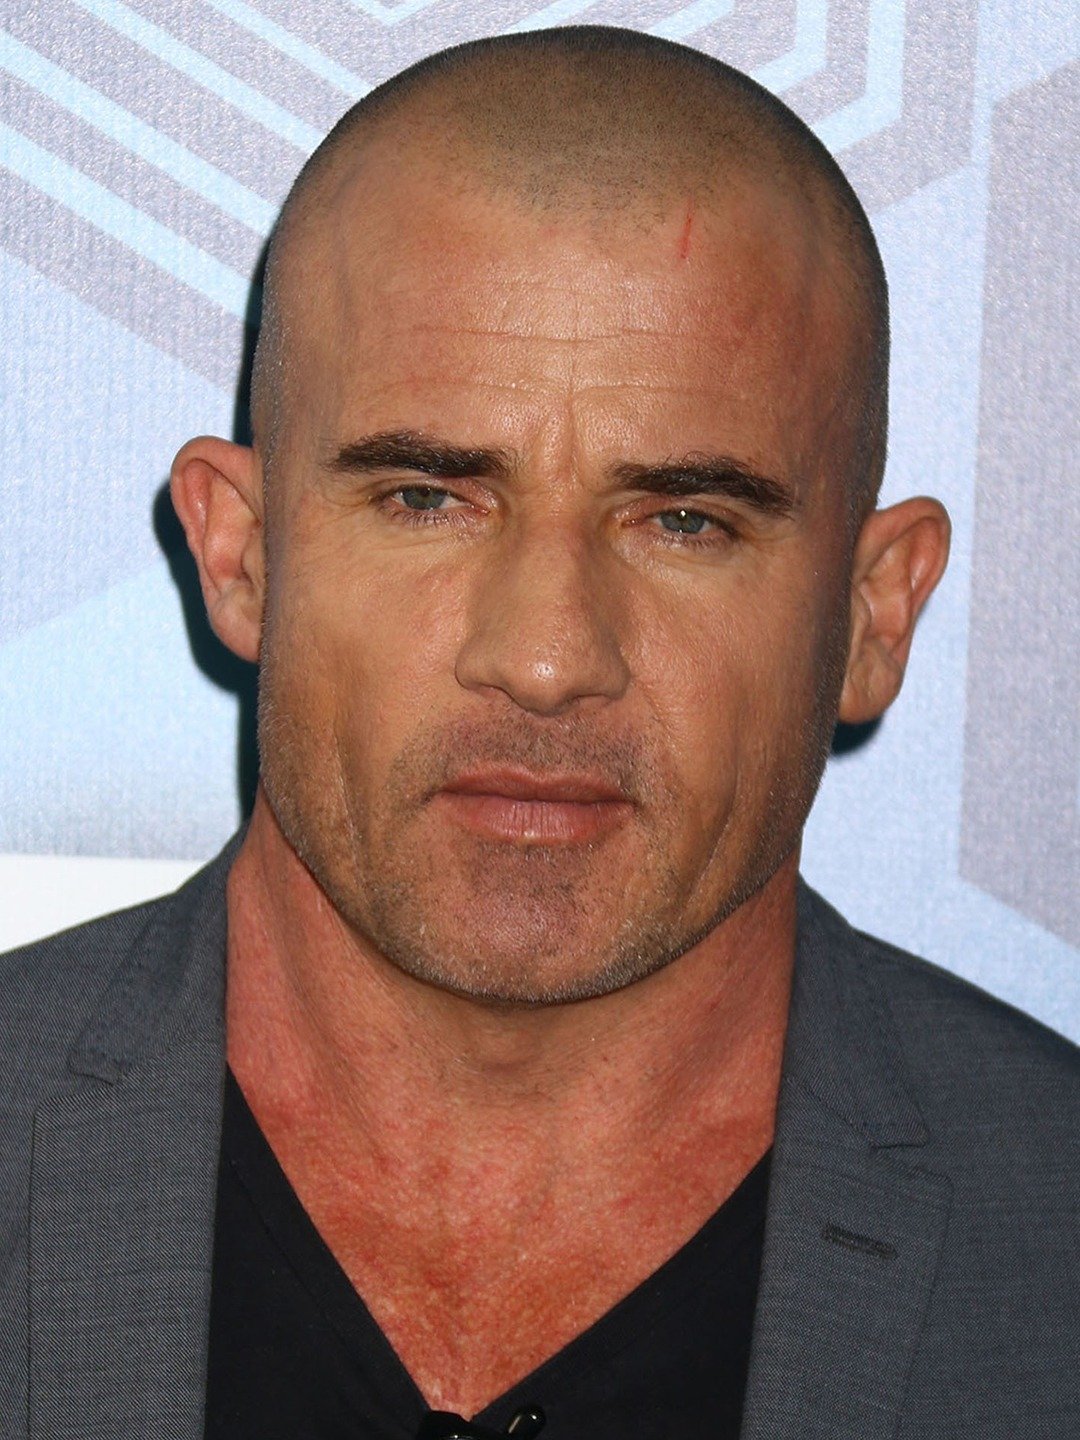 How tall is Dominic Purcell?